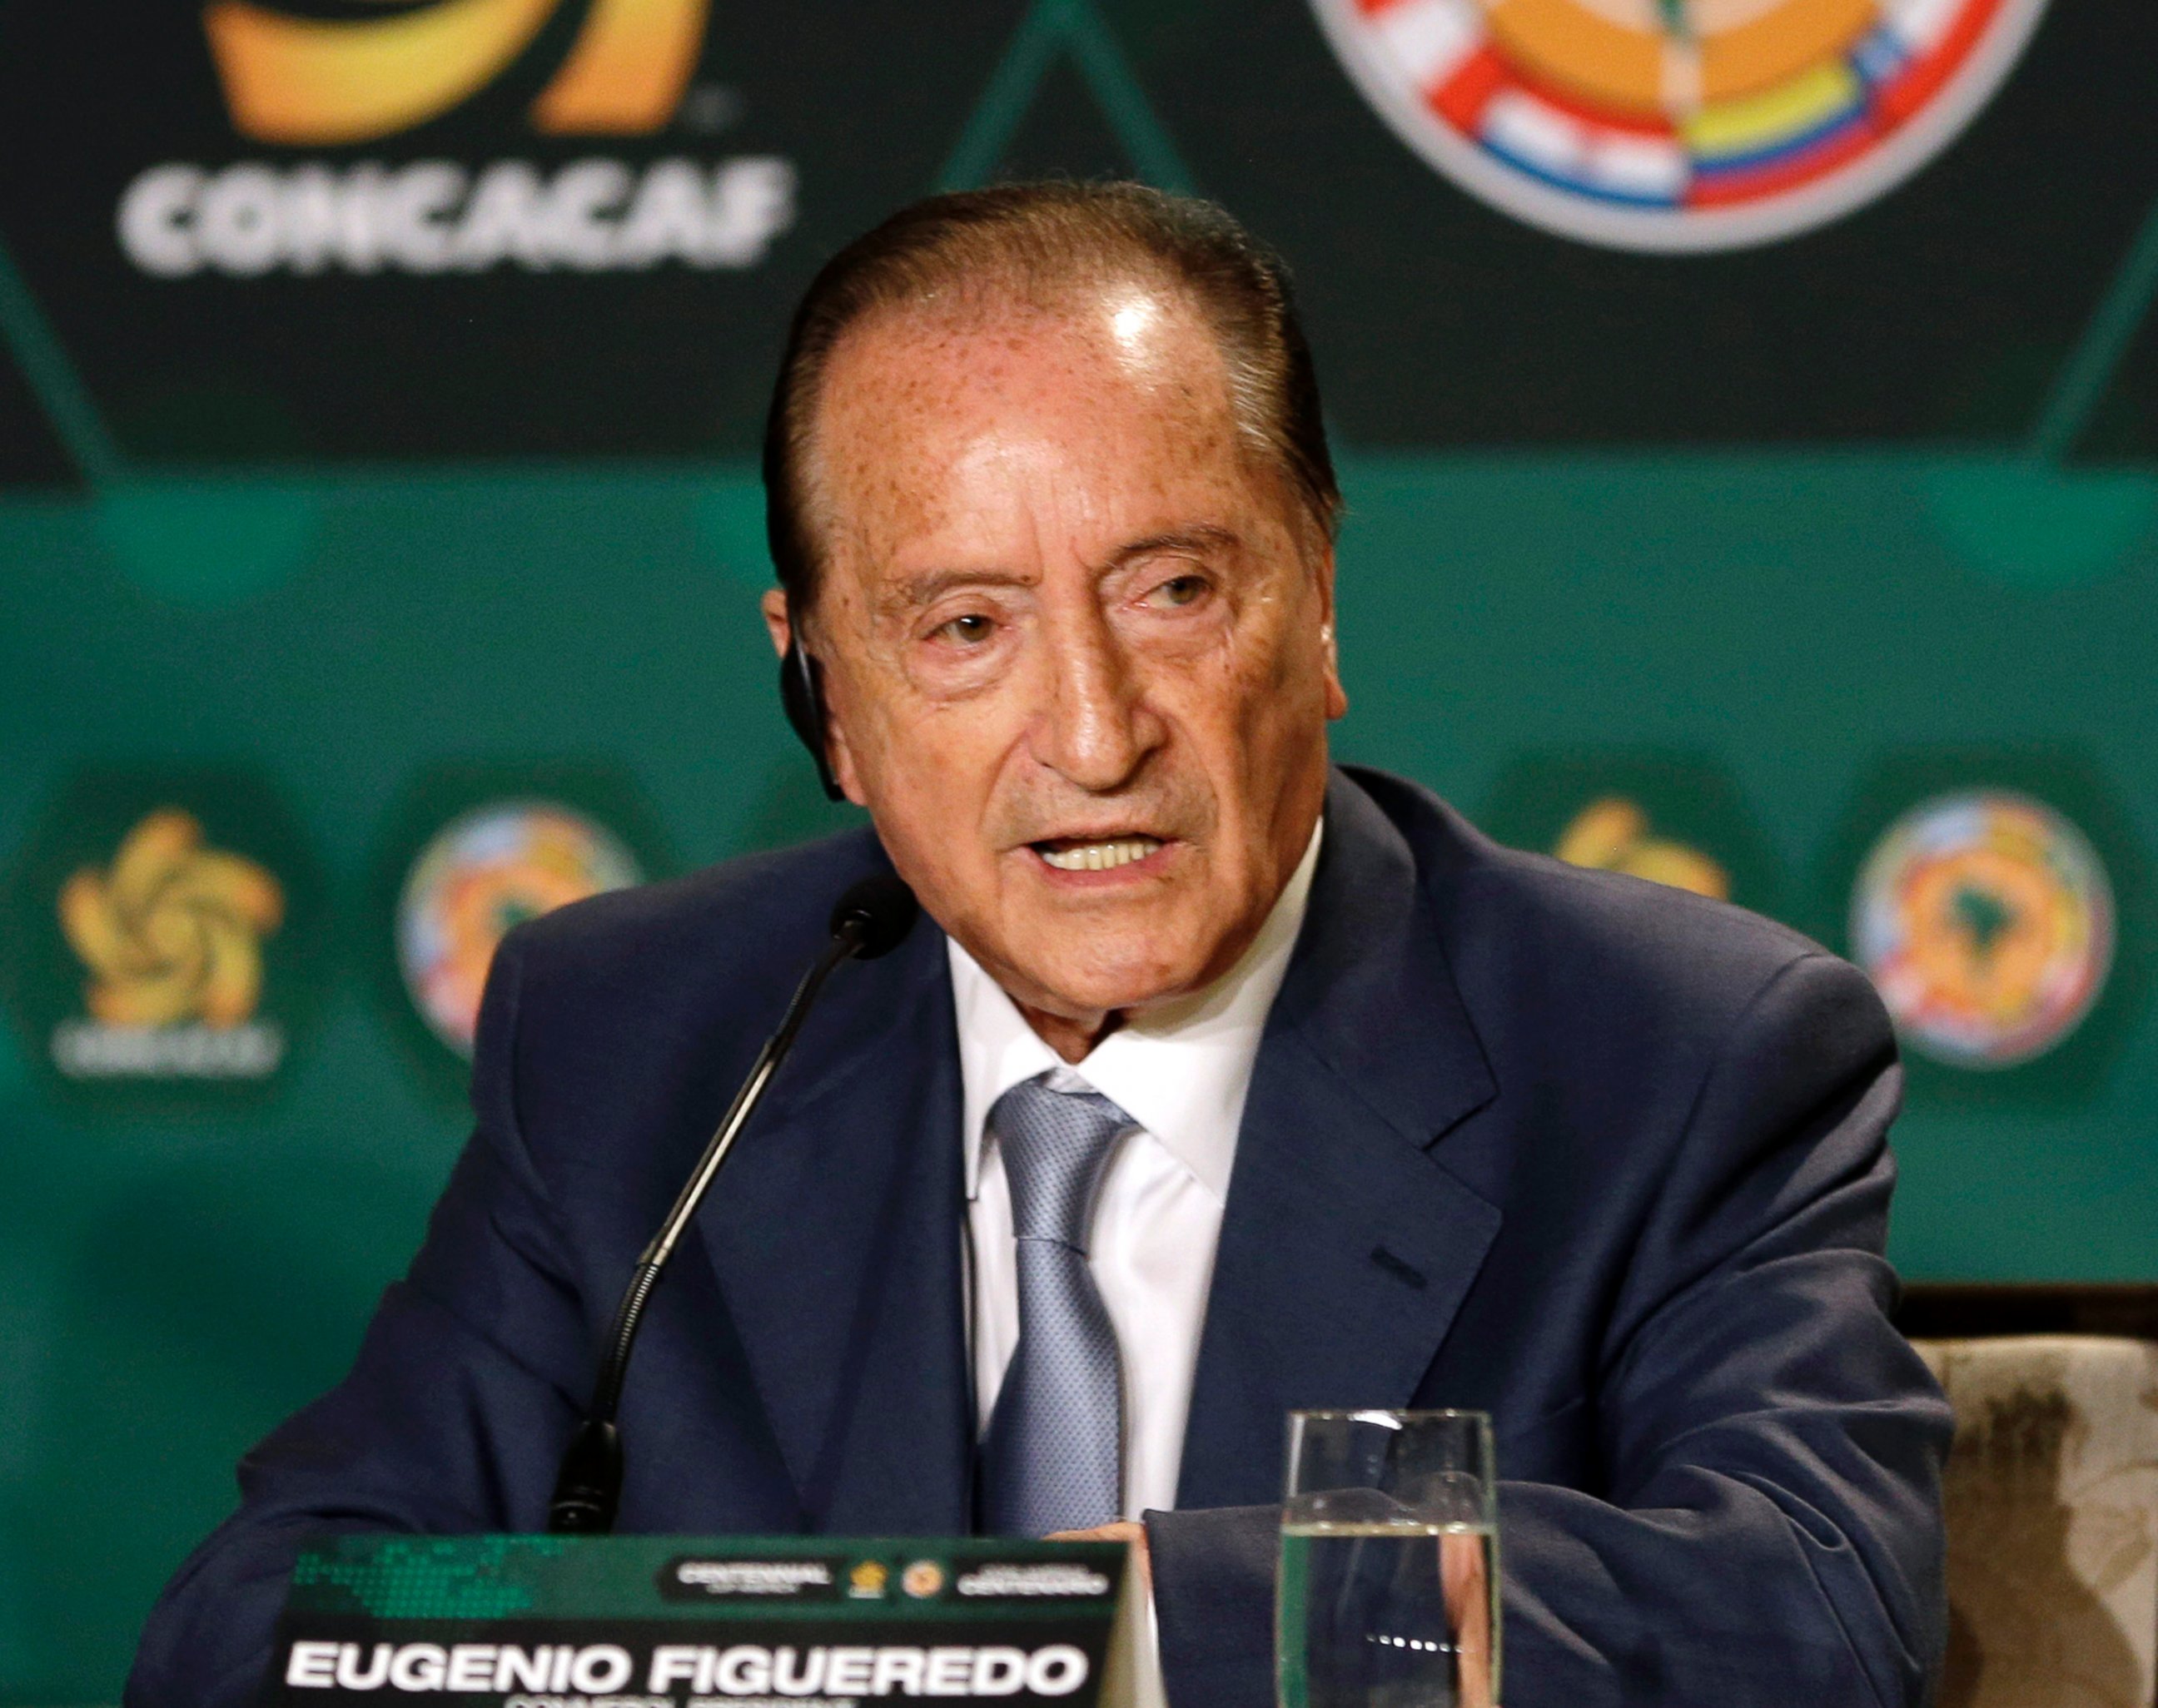 PHOTO: Eugenio Figueredo, president of CONMEBOL, the South America soccer confederation, speaks during a news conference in Bal Harbour, Fla., May 1, 2014.